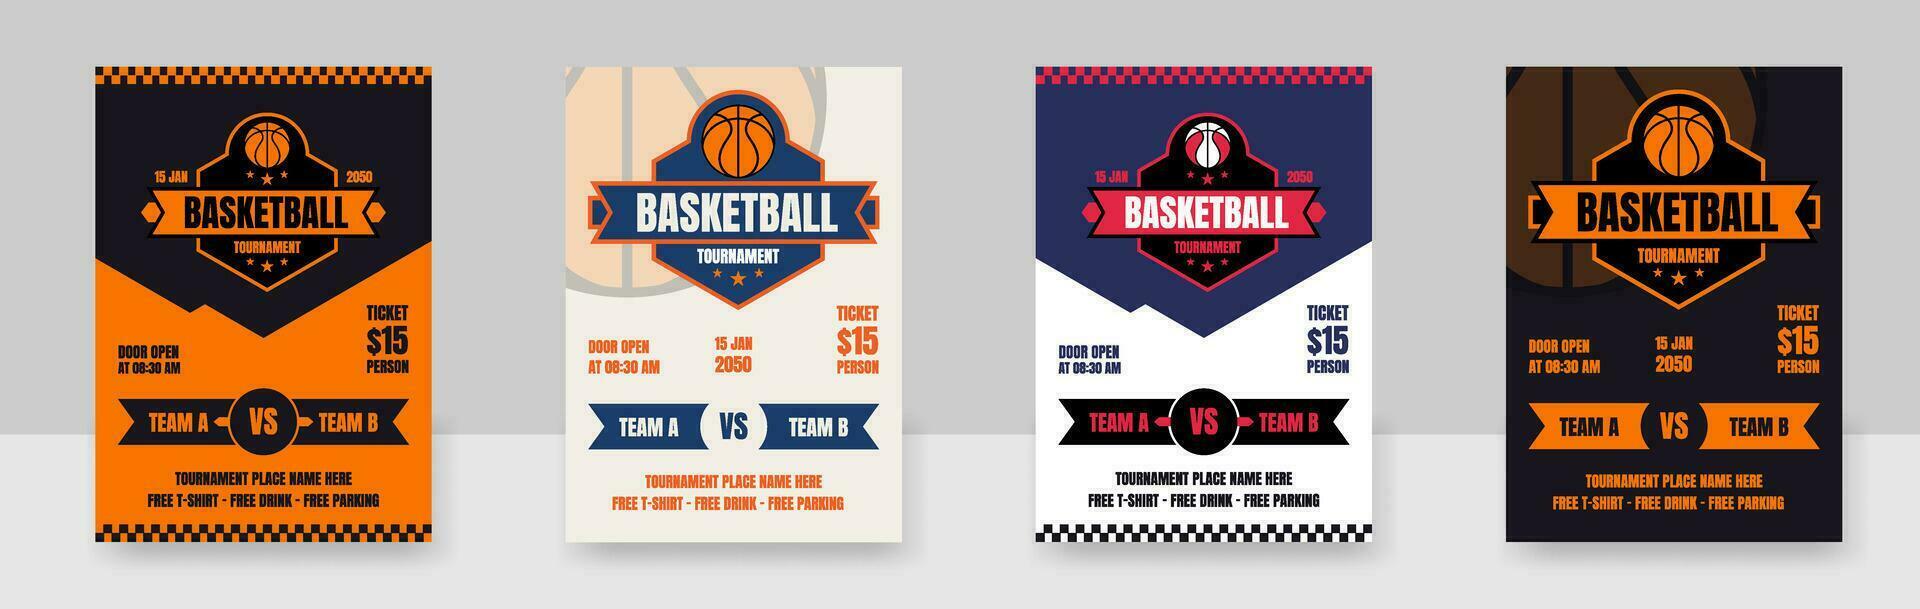 Basketball camp posters, Basketball tournament, modern sports posters design. Vector illustration.